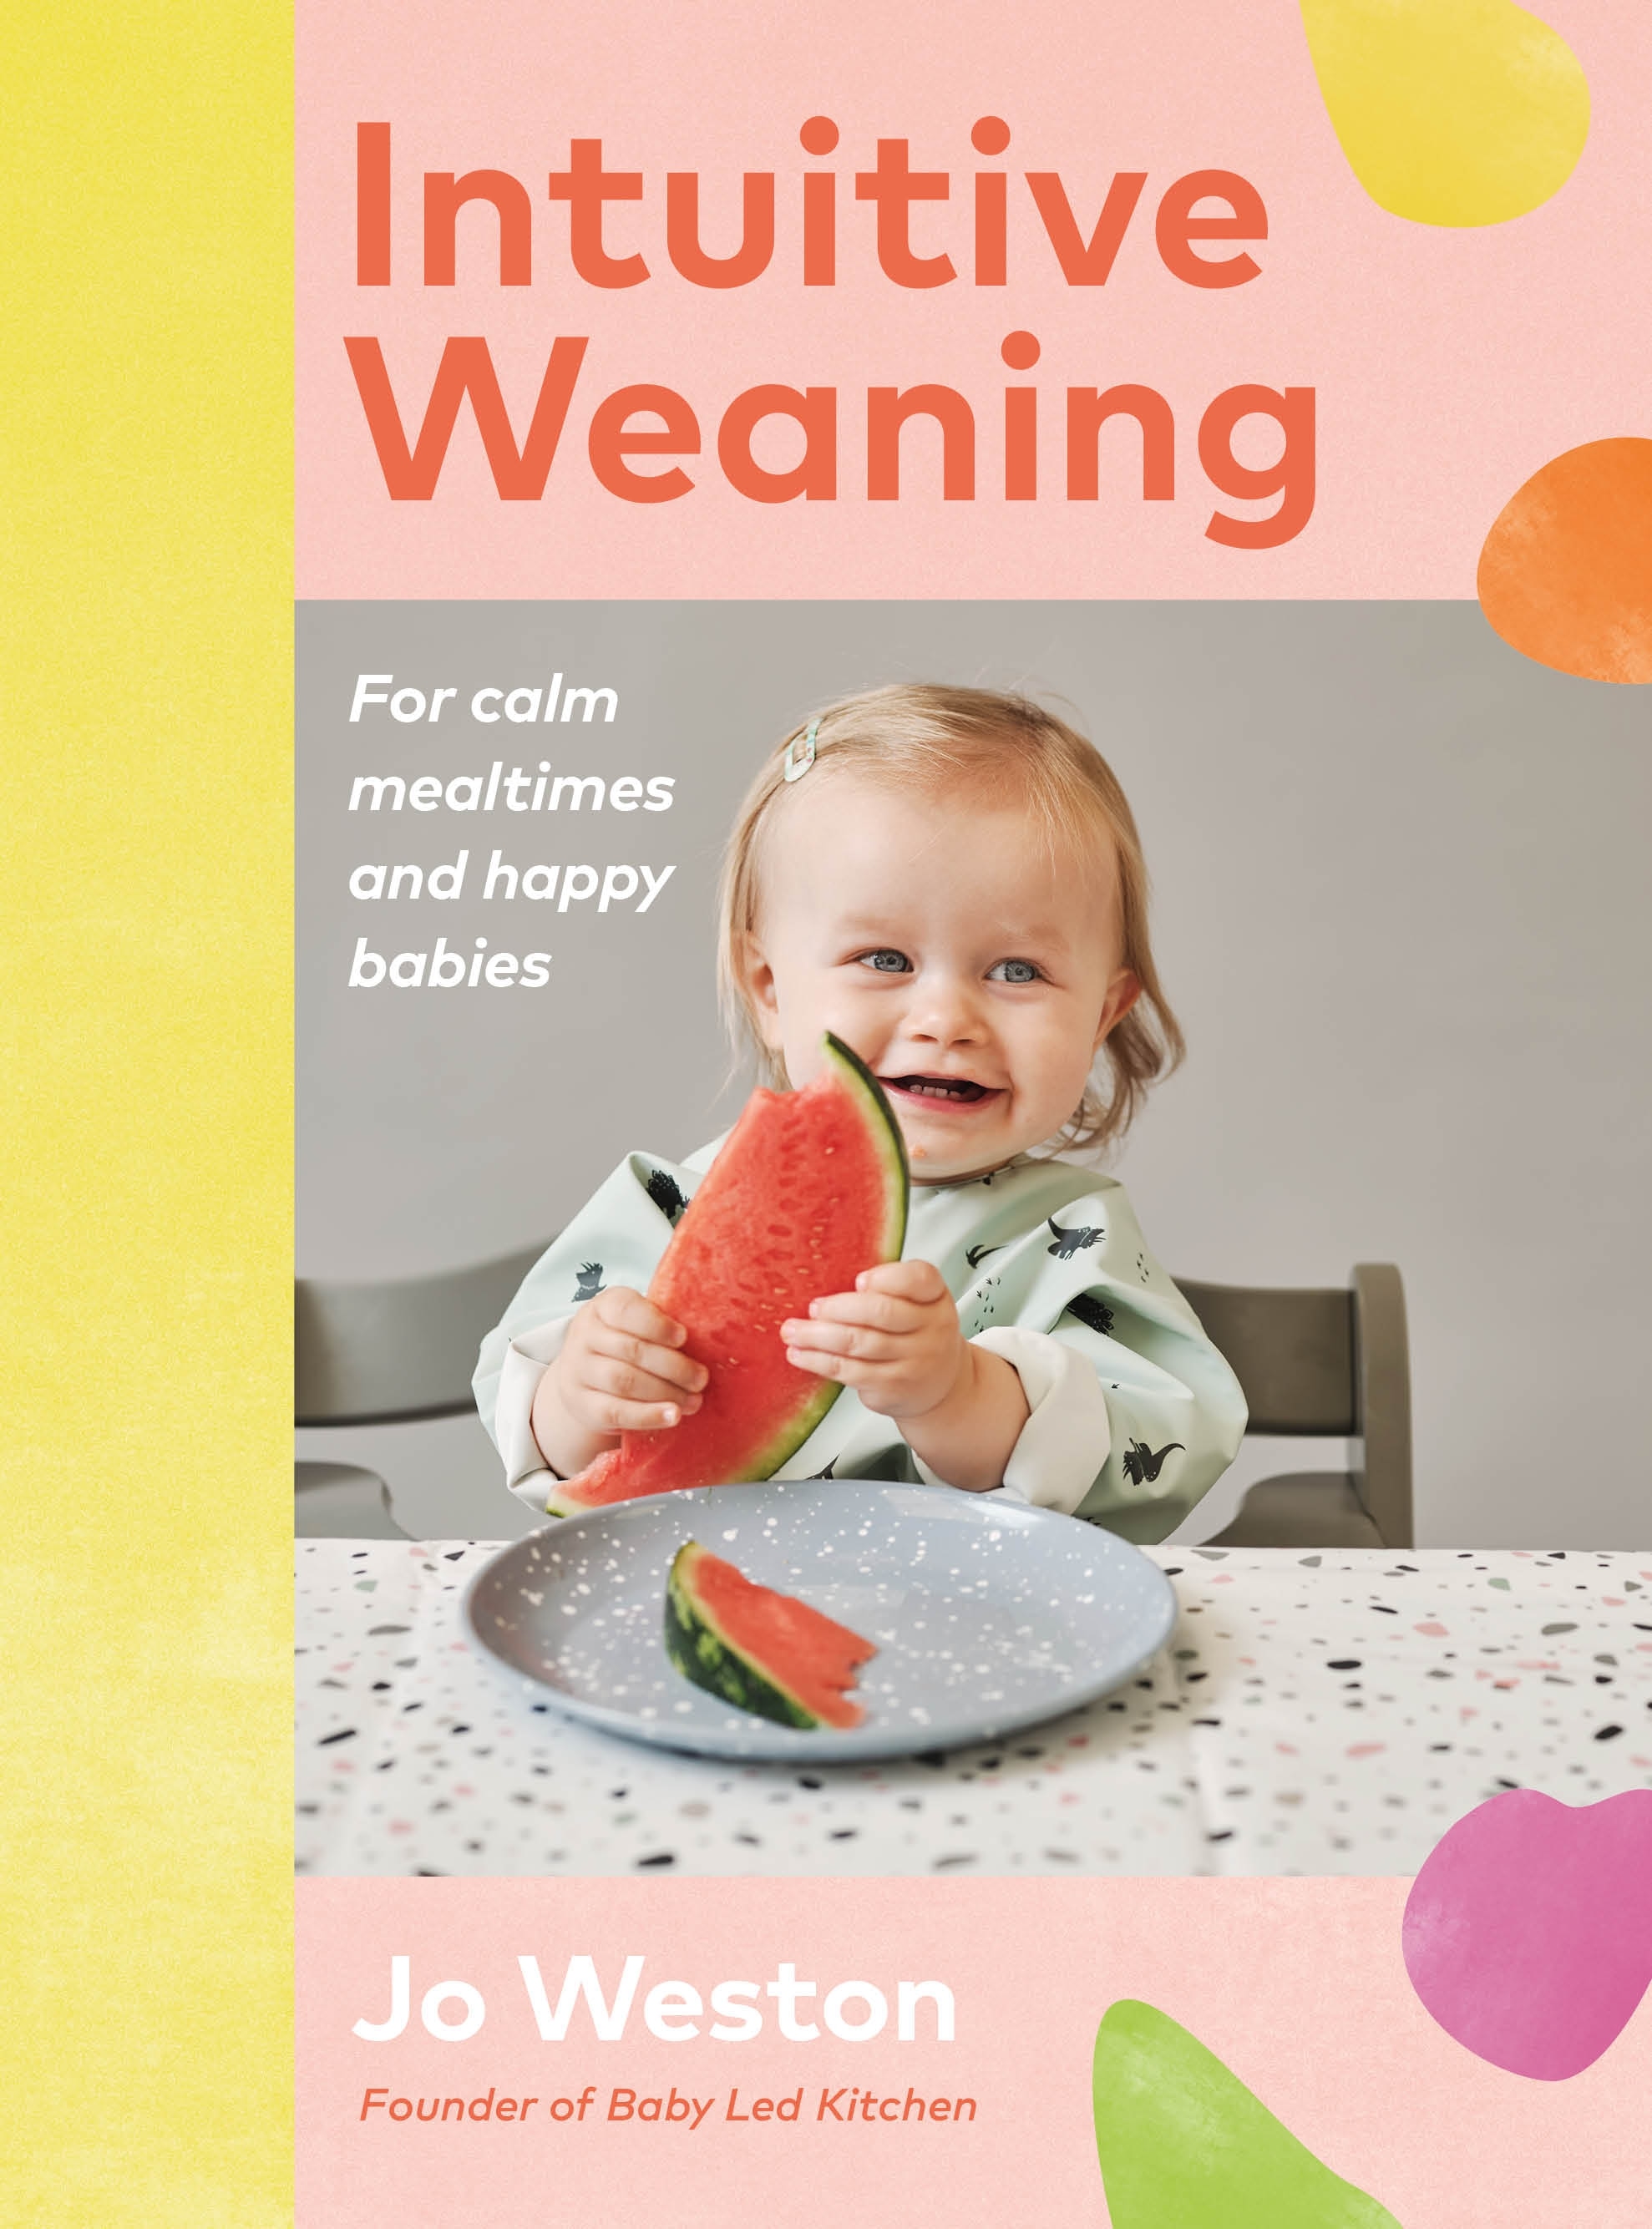 Book “Intuitive Weaning” by Jo Weston — May 5, 2022